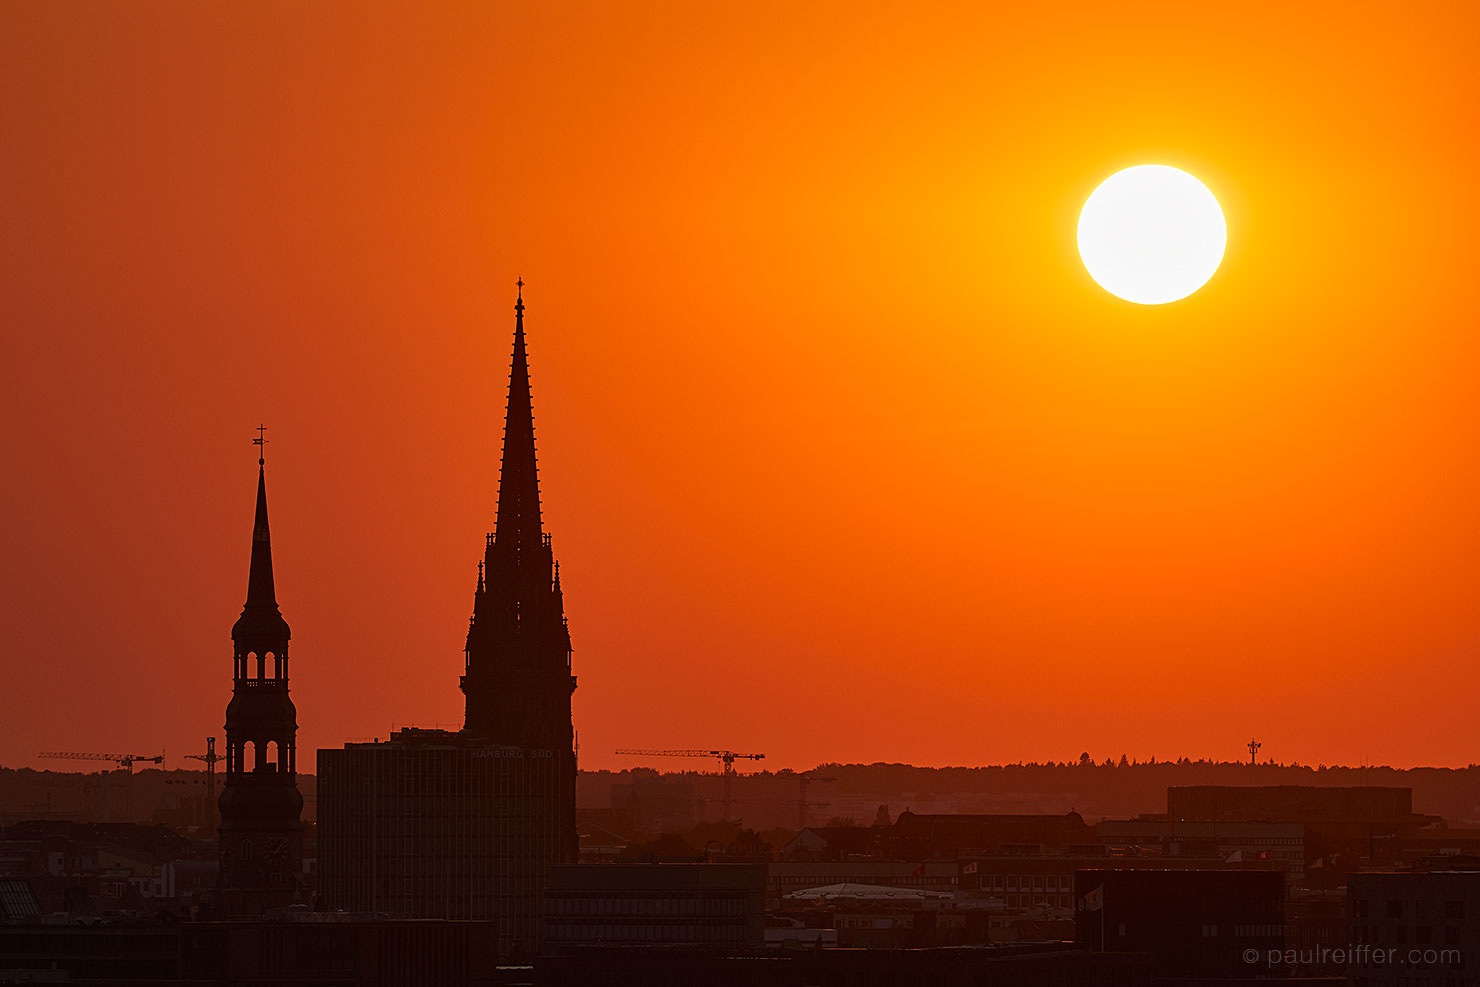 Hamburg Germany Sunset City Rooftop Holiday Inn Downtown Church Cathedral Skyline Glow Orange Paul Reiffer Photographer Rollei Lunar Eclipse 2018